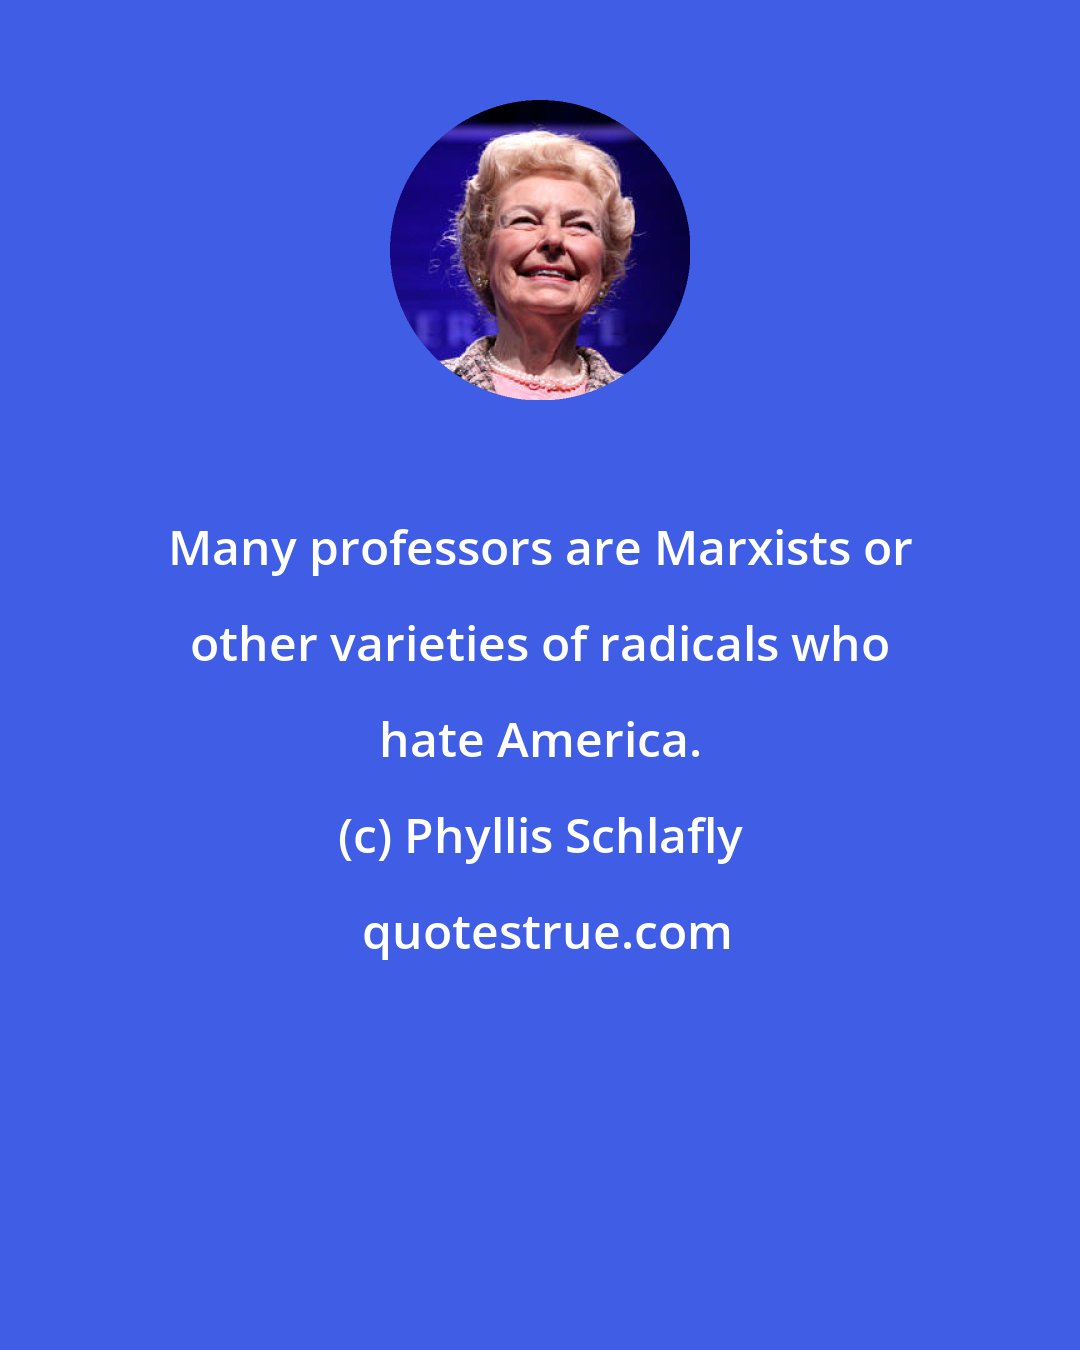 Phyllis Schlafly: Many professors are Marxists or other varieties of radicals who hate America.